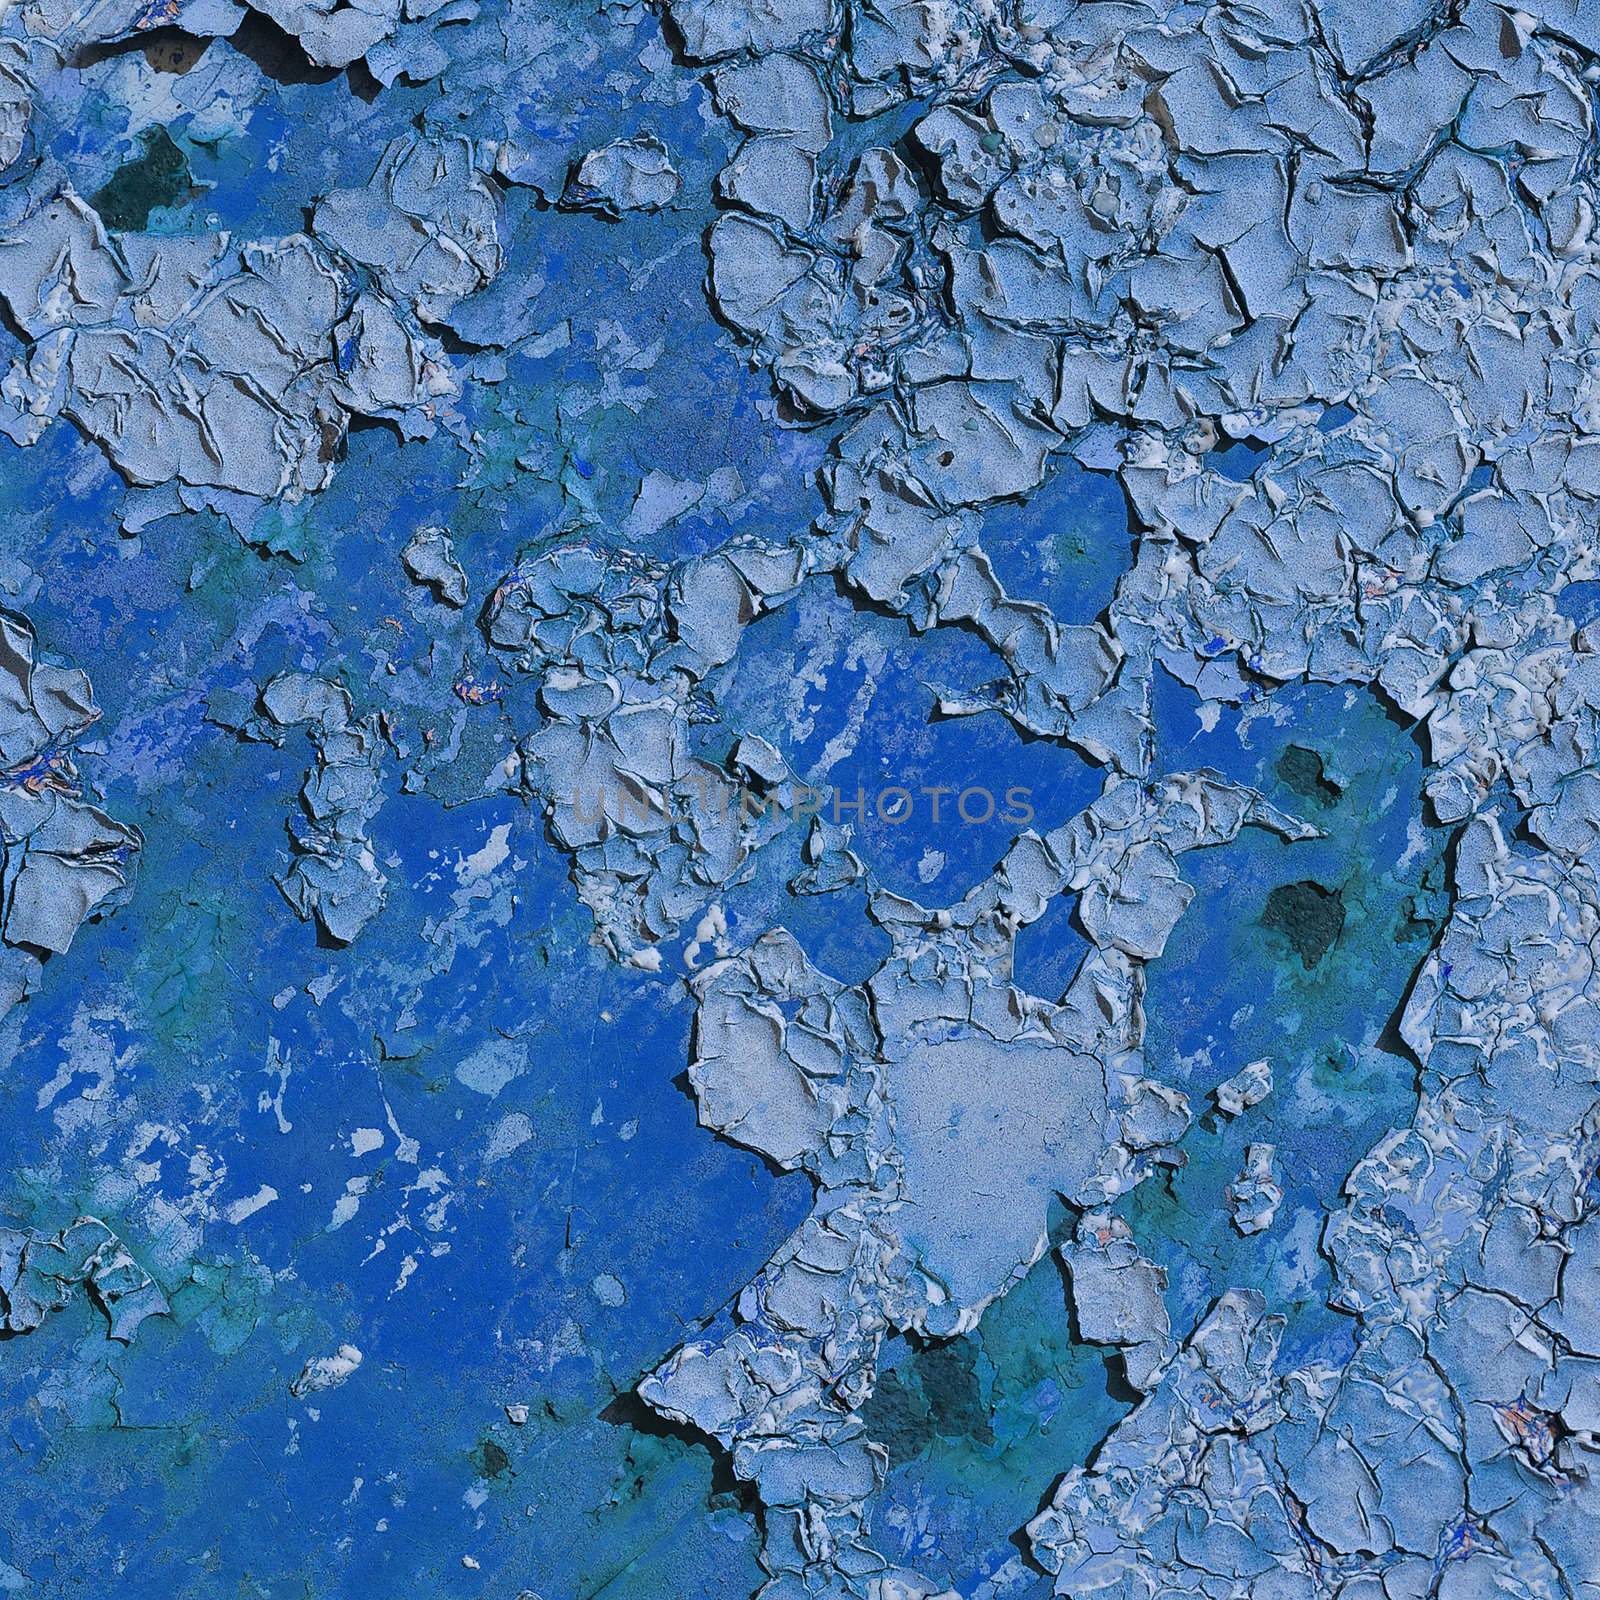 The surface with the old blue paint - a square texture